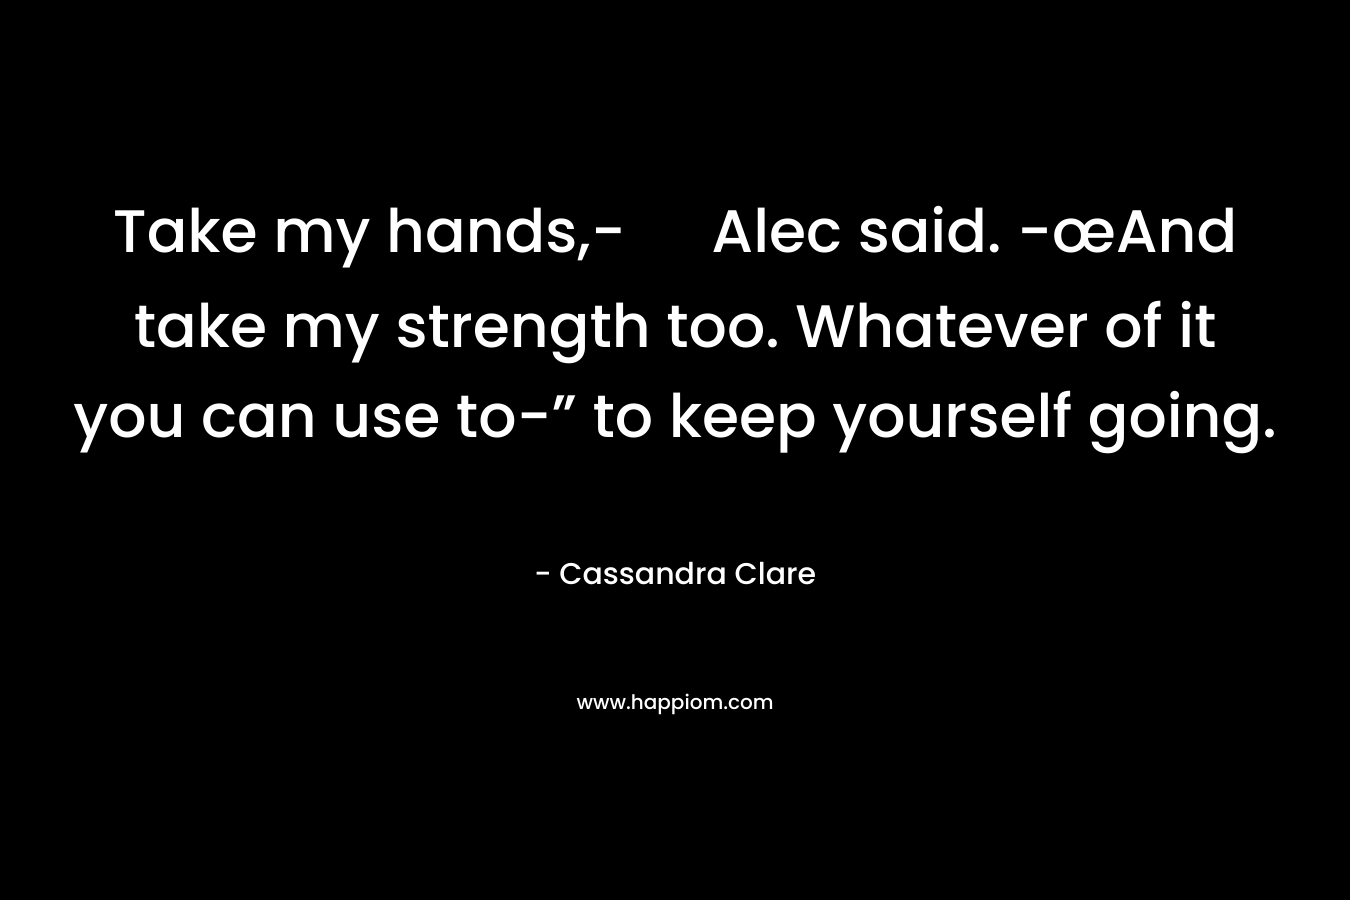 Take my hands,- Alec said. -œAnd take my strength too. Whatever of it you can use to-” to keep yourself going. – Cassandra Clare